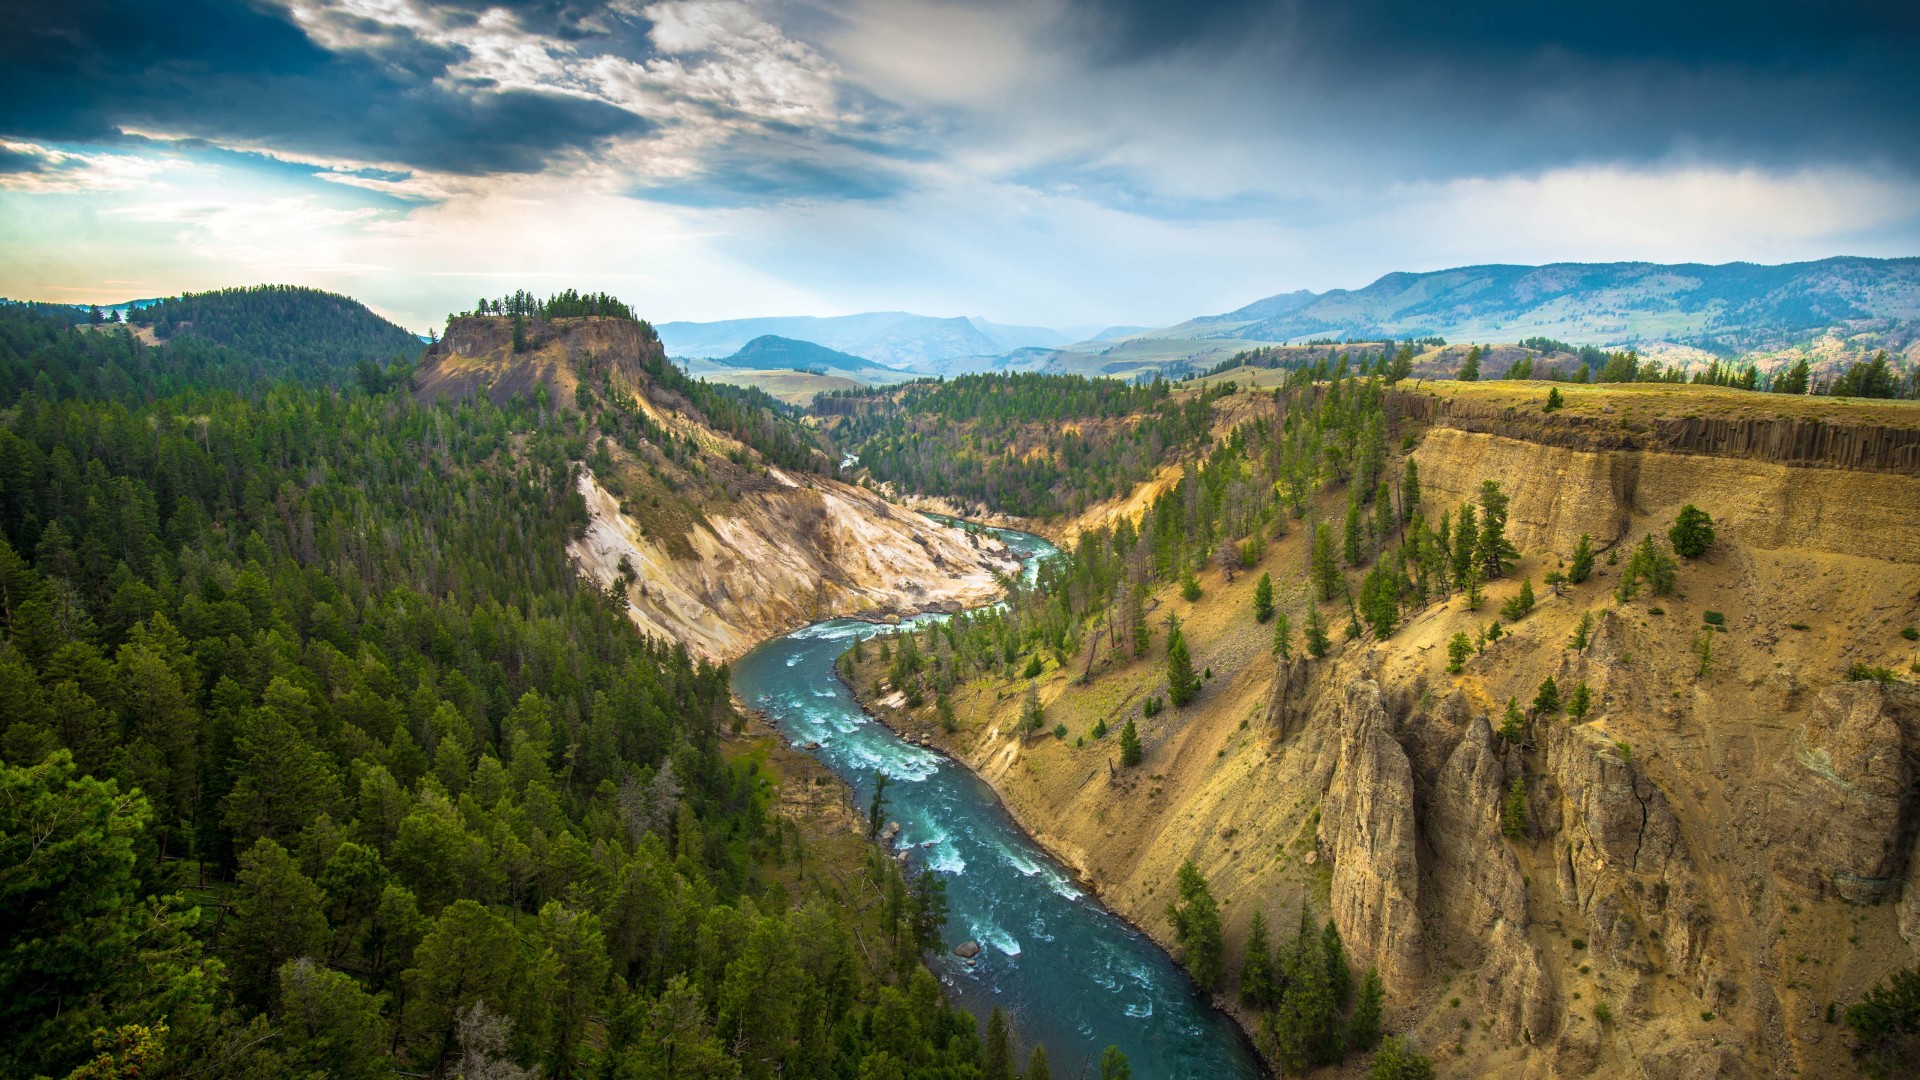 The River, Grand Canyon of Yellowstone National Park, USA Wallpaper for Desktop 1920x1080